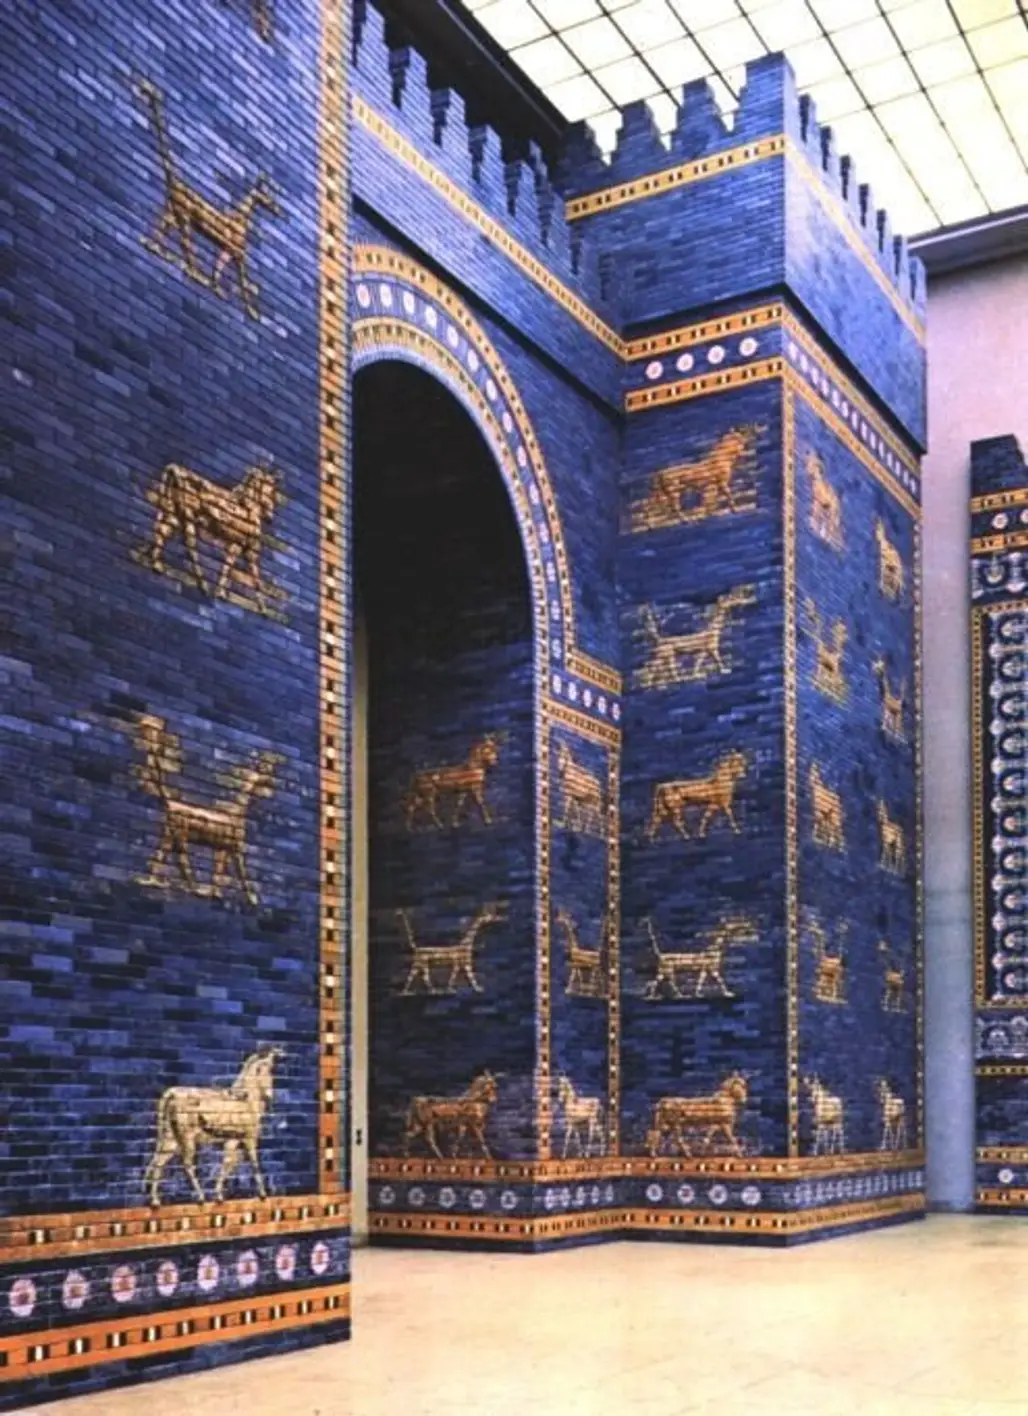 See the Ishtar Gate